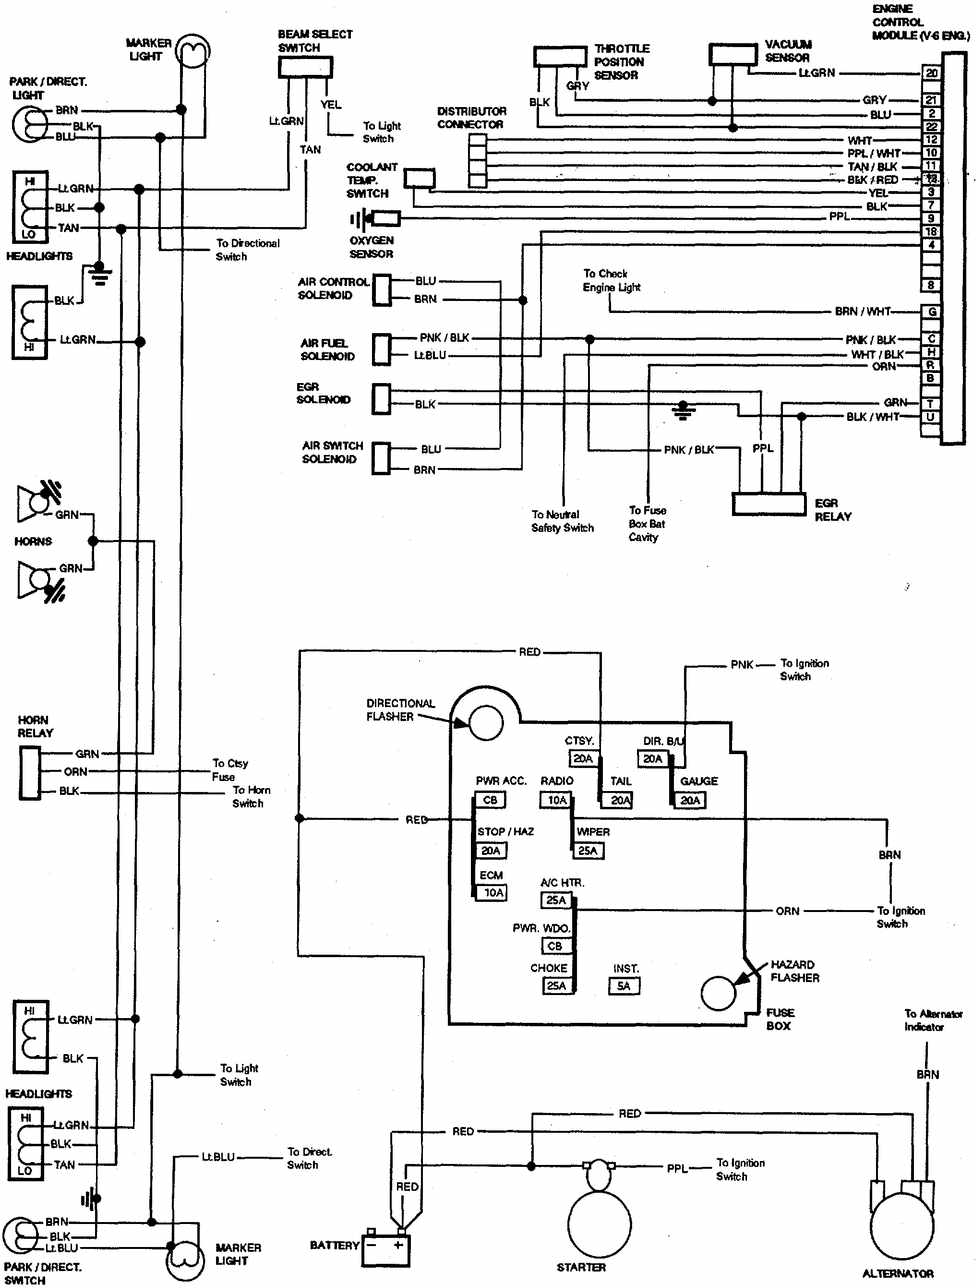 Chevrolet V8 Trucks 1981-1987 Electrical Wiring Diagram | All about Wiring Diagrams